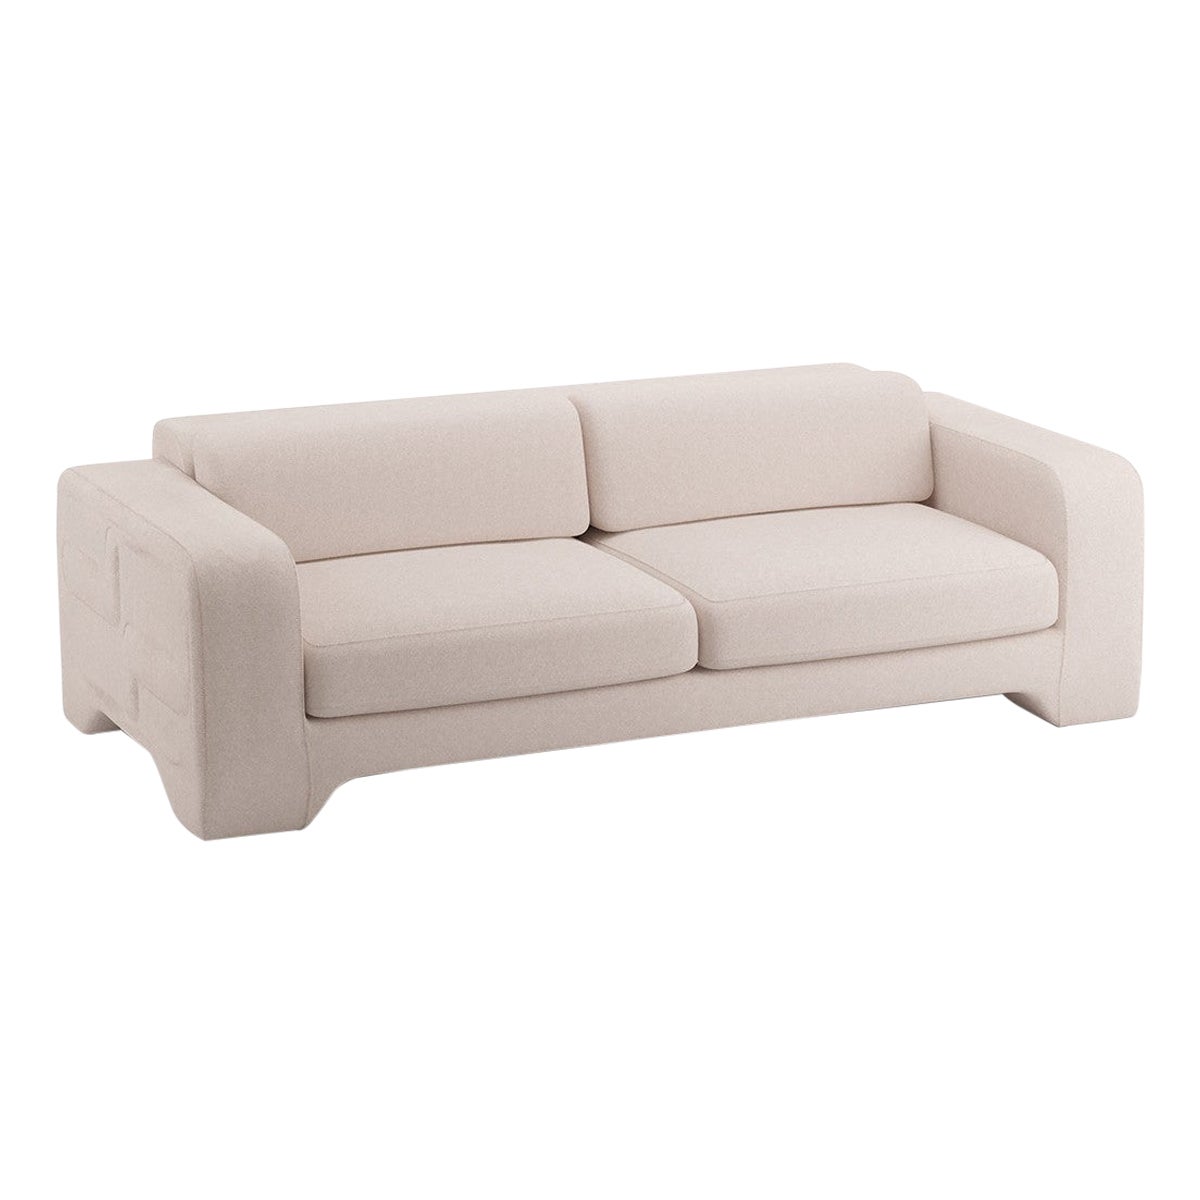 Popus Editions Giovanna 2.5 Seater Sofa in Natural Cork Linen Upholstery For Sale